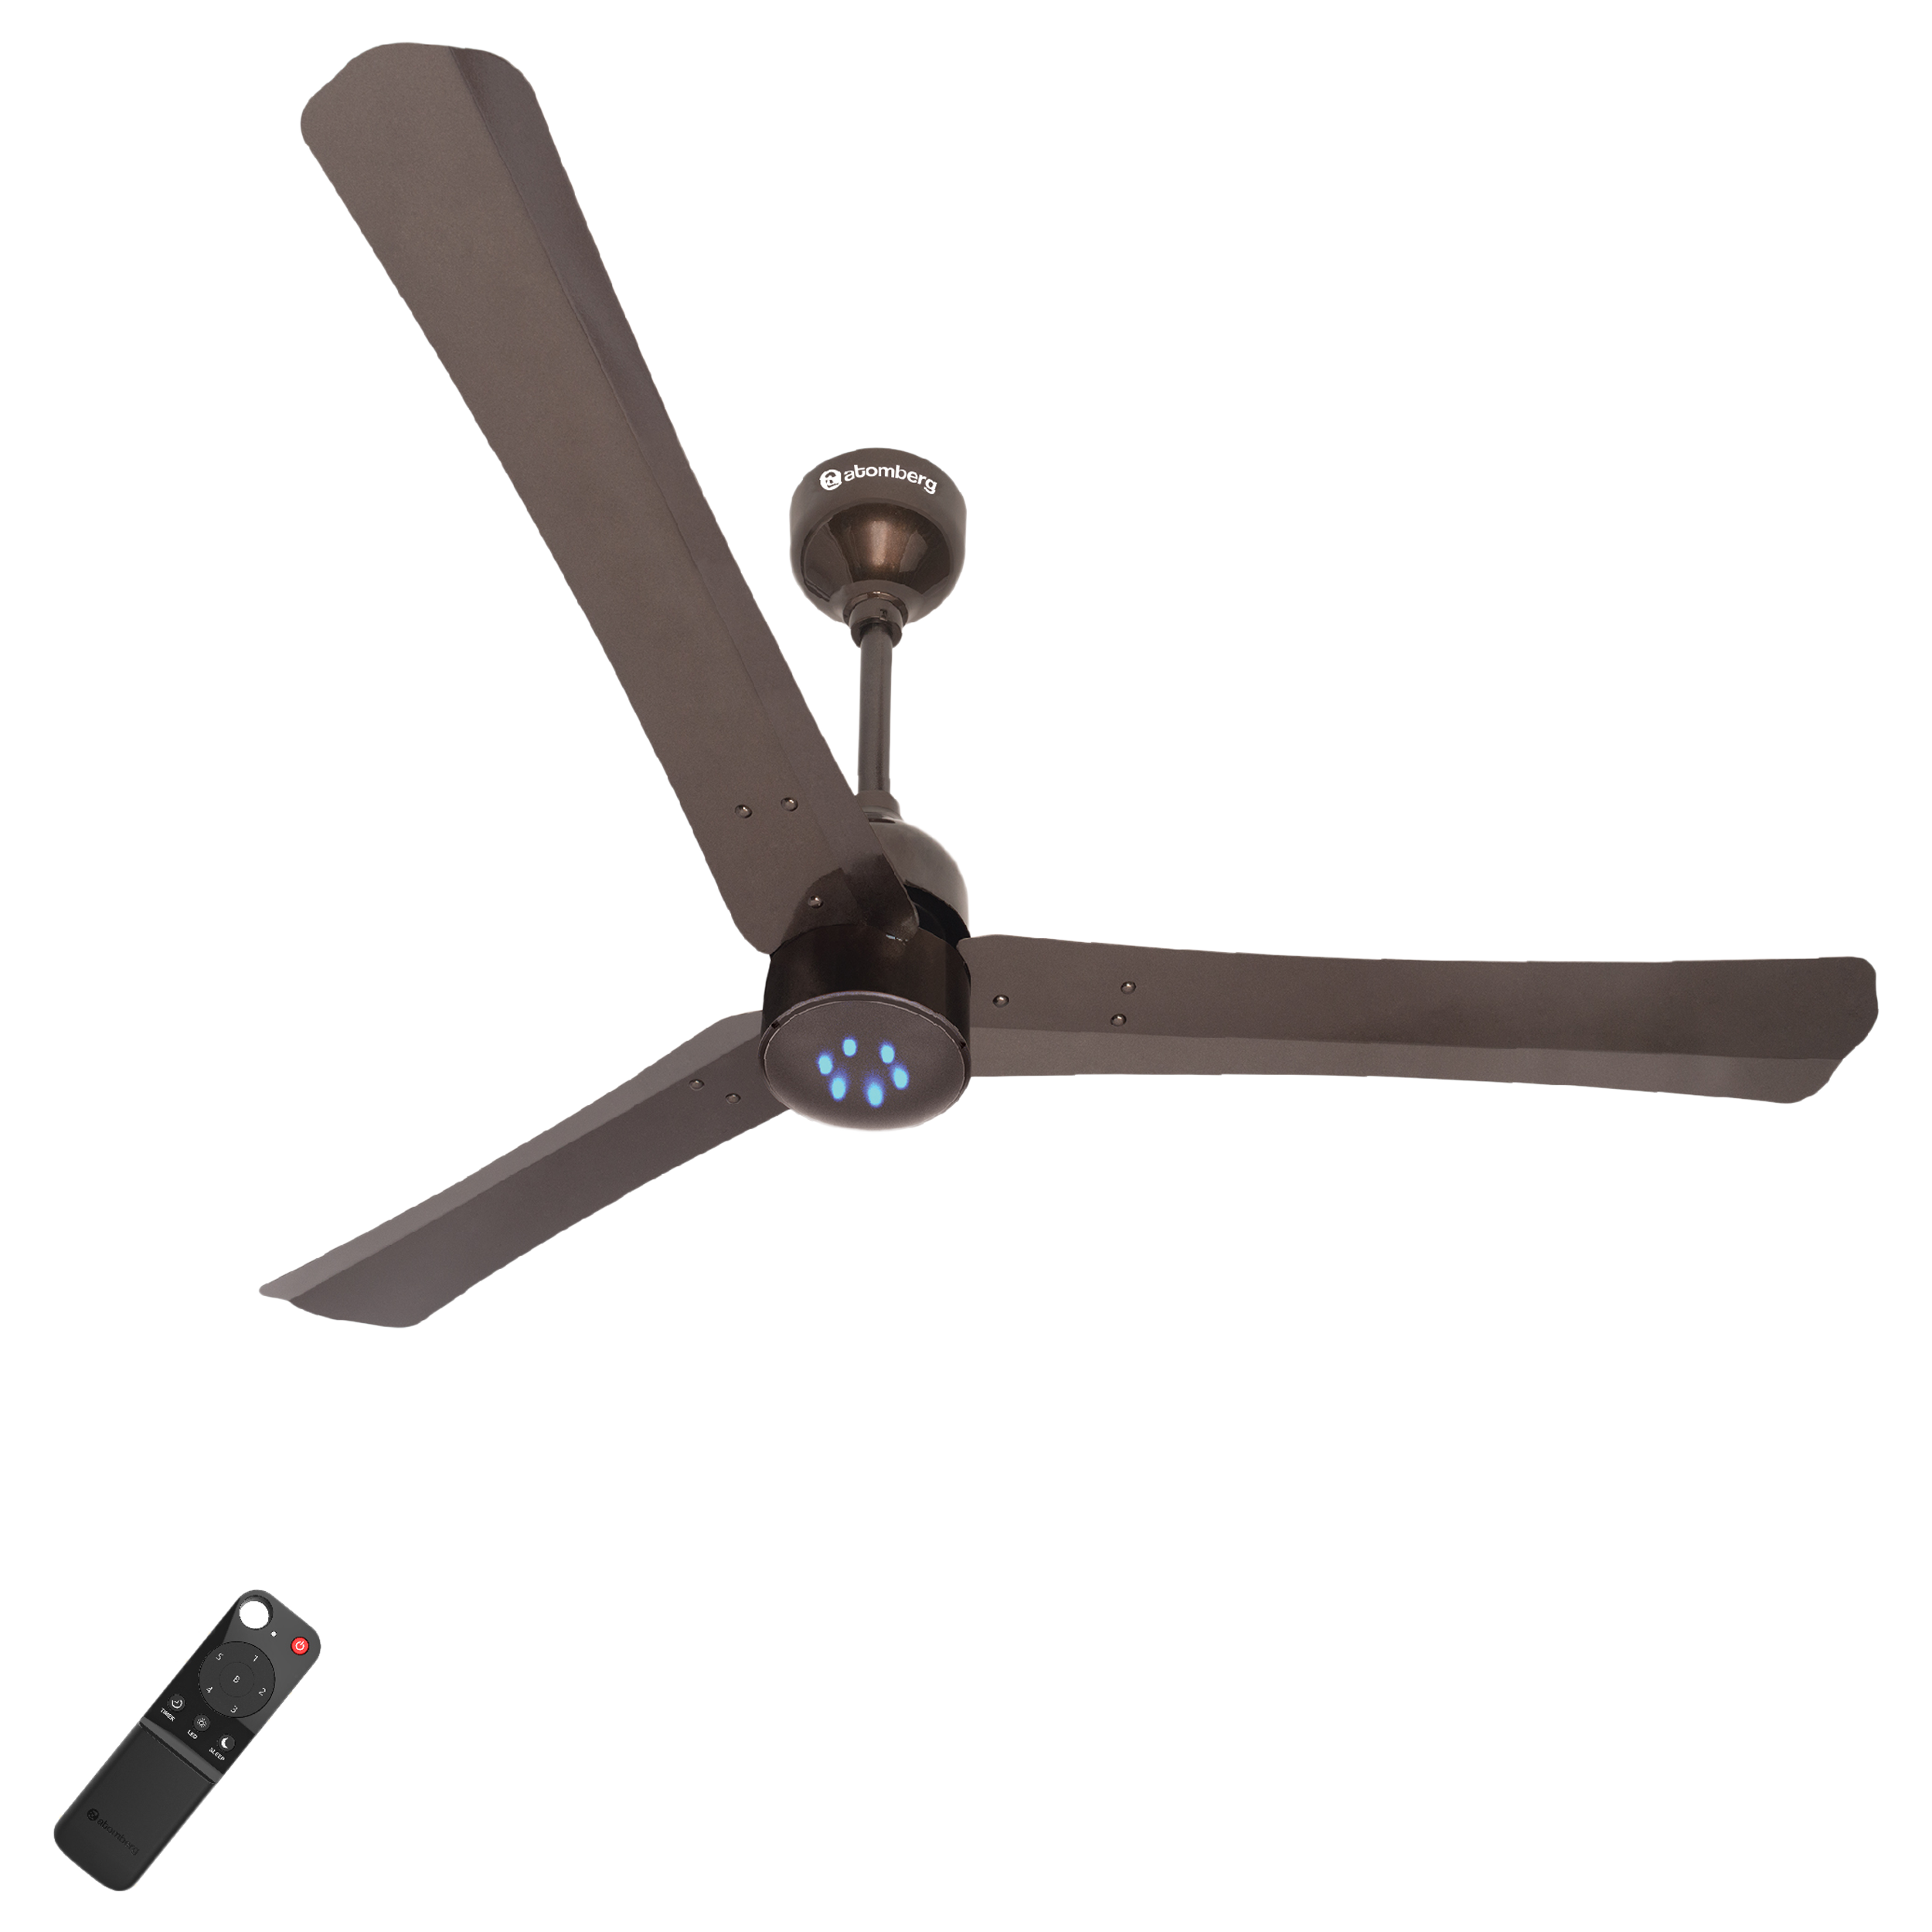 Buy App Controlled Ceiling Fan Online at Best Prices | Croma